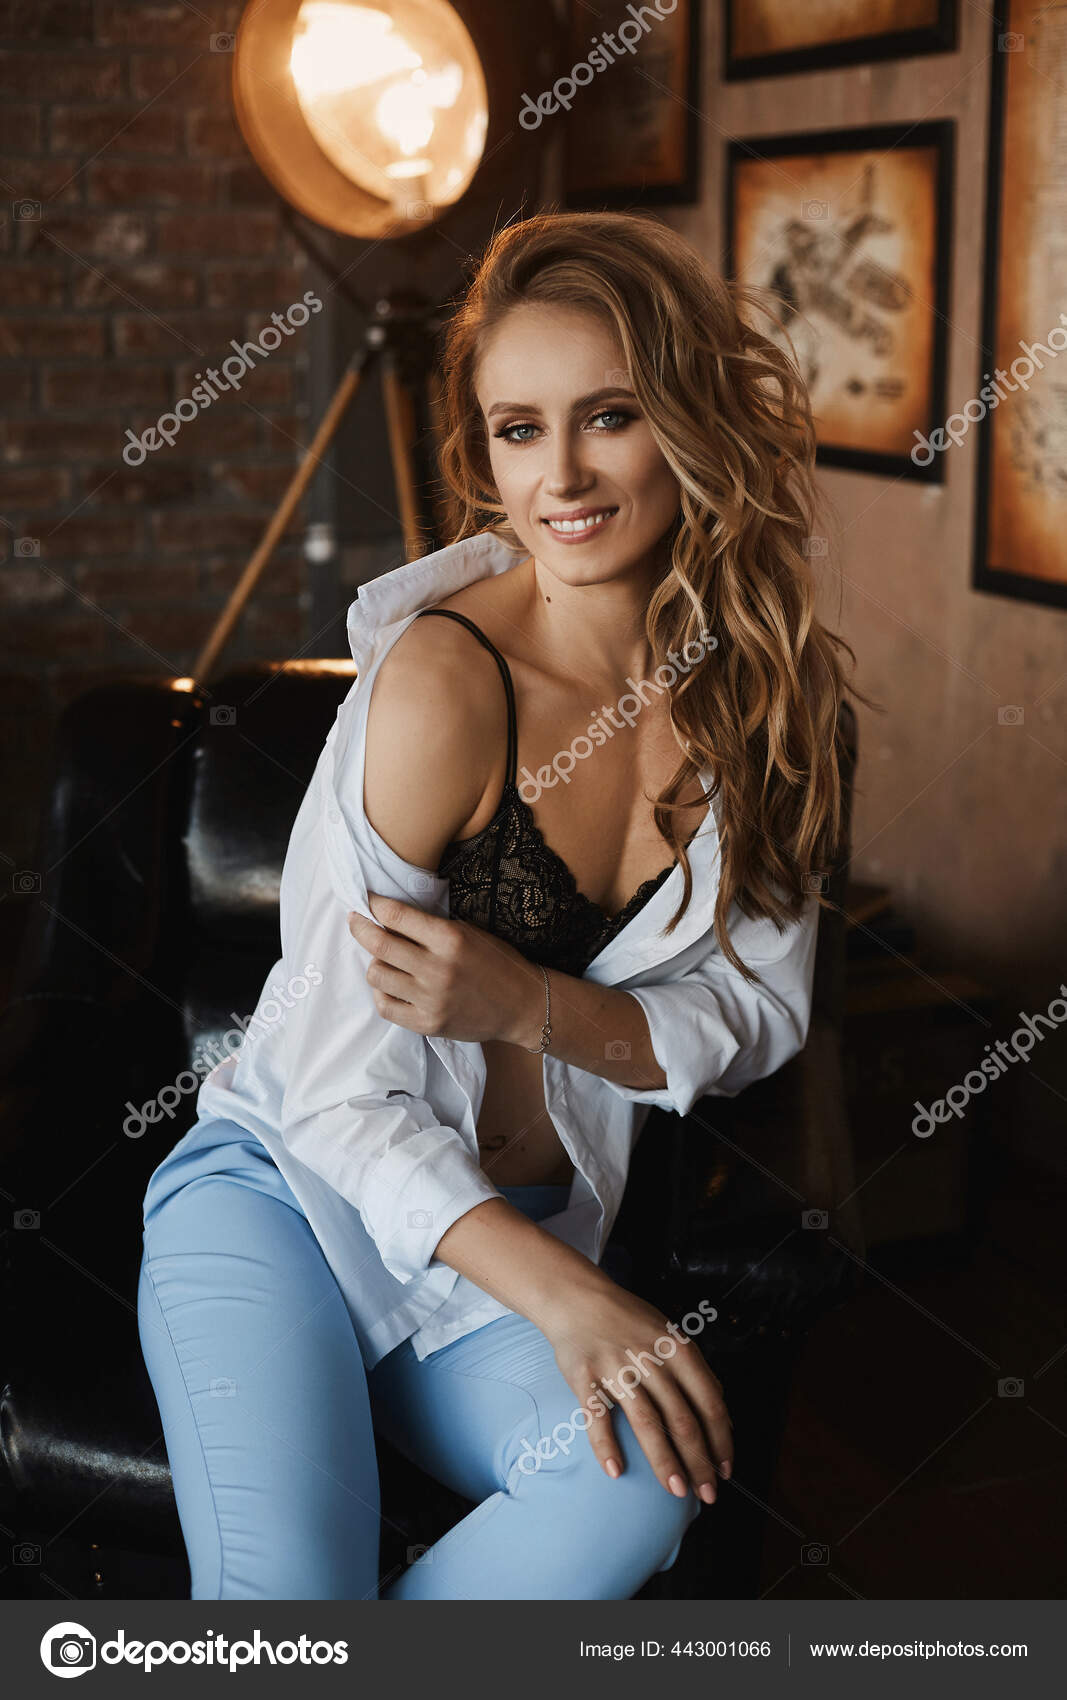 Model woman with sporty shaped body in an unbuttoned shirt and black bra  posing in the interior. Model girl with perfect body and make-up indoors  Stock Photo by ©innarevyako 443001066